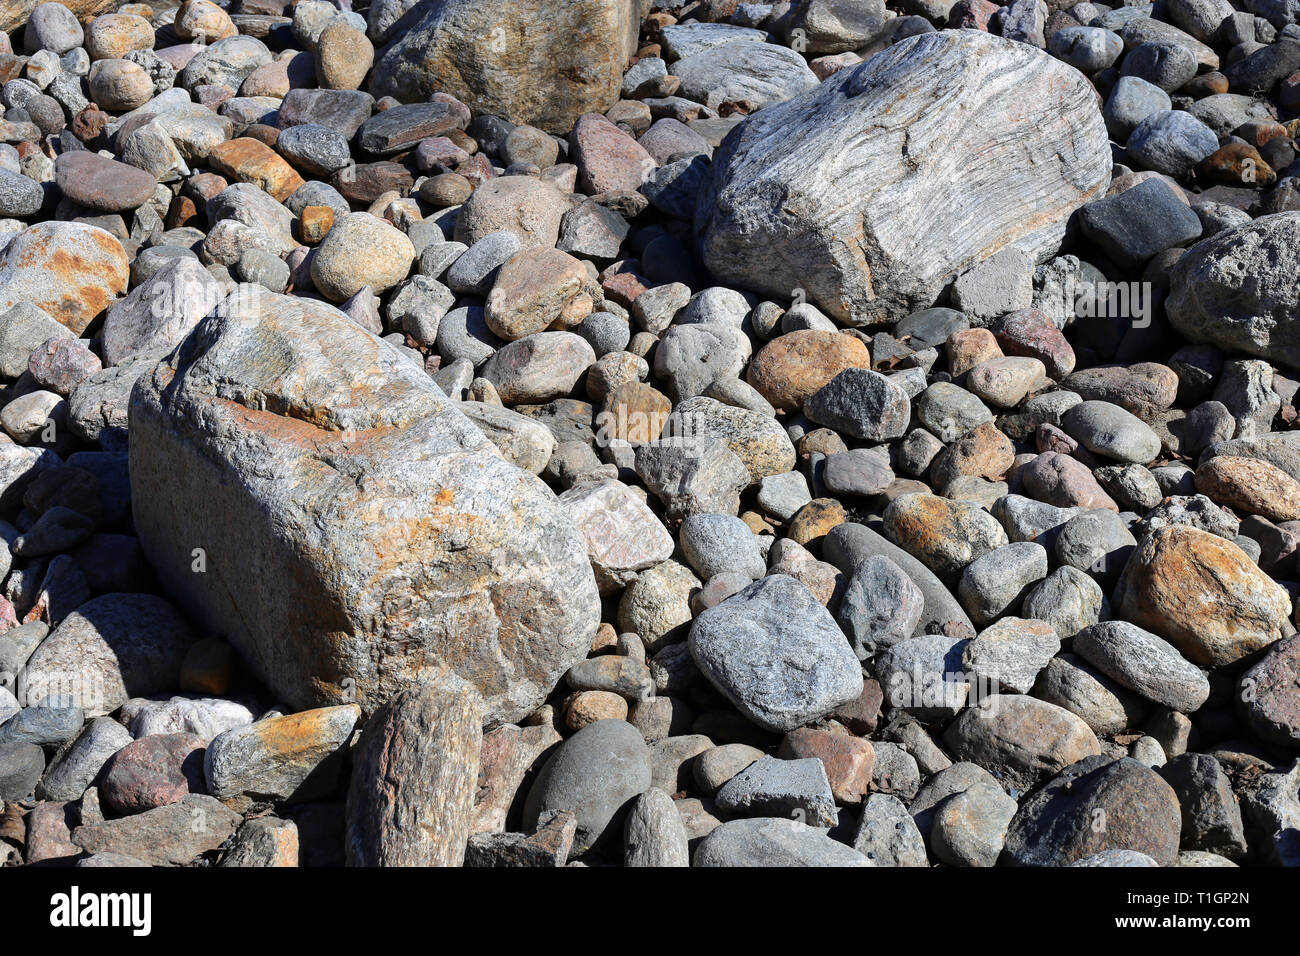 https://c8.alamy.com/comp/T1GP2N/plenty-of-colorful-small-medium-sized-and-big-rocks-in-all-different-shapes-beautiful-texture-photographed-during-a-sunny-summer-day-color-image-T1GP2N.jpg